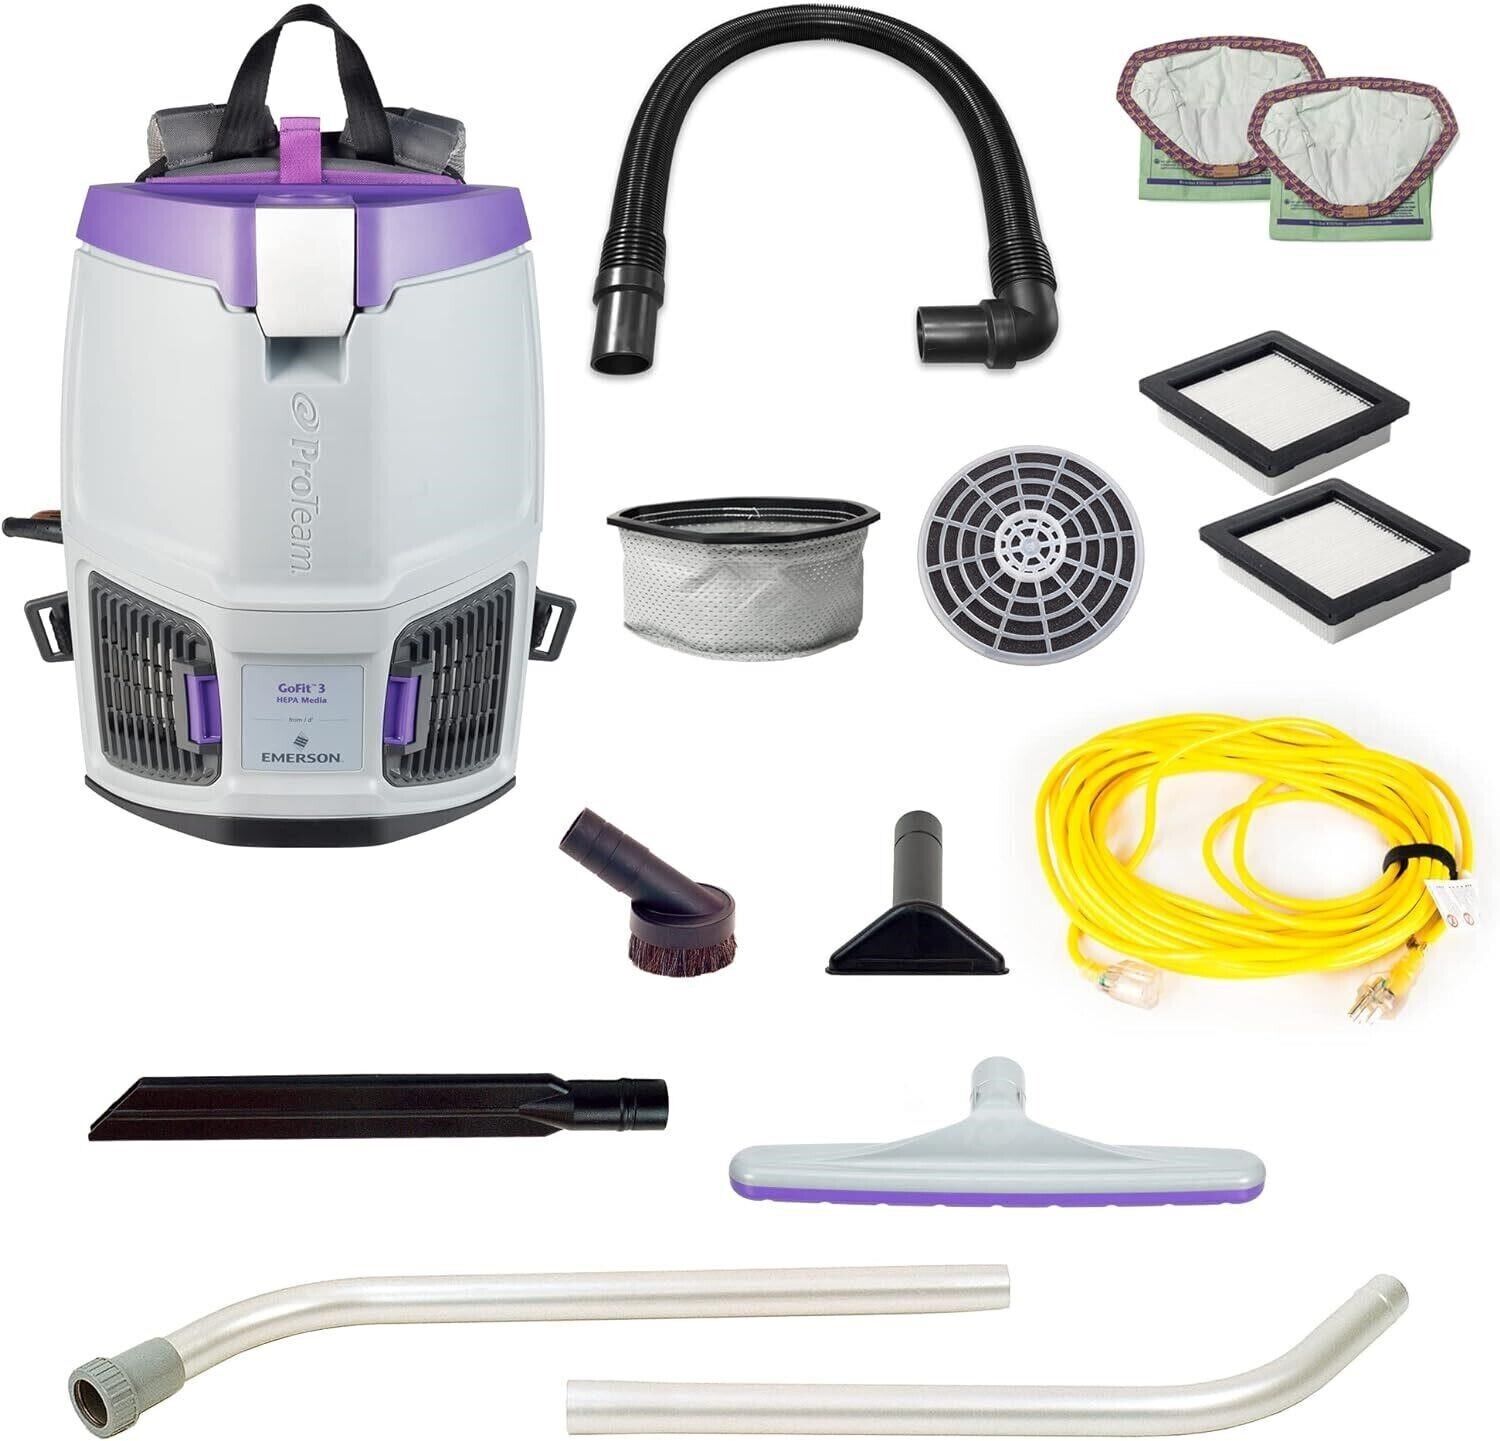 ProTeam 107713 GoFit 3, 3 qt. Backpack Vacuum w/ Xover Telescoping Wand Kit